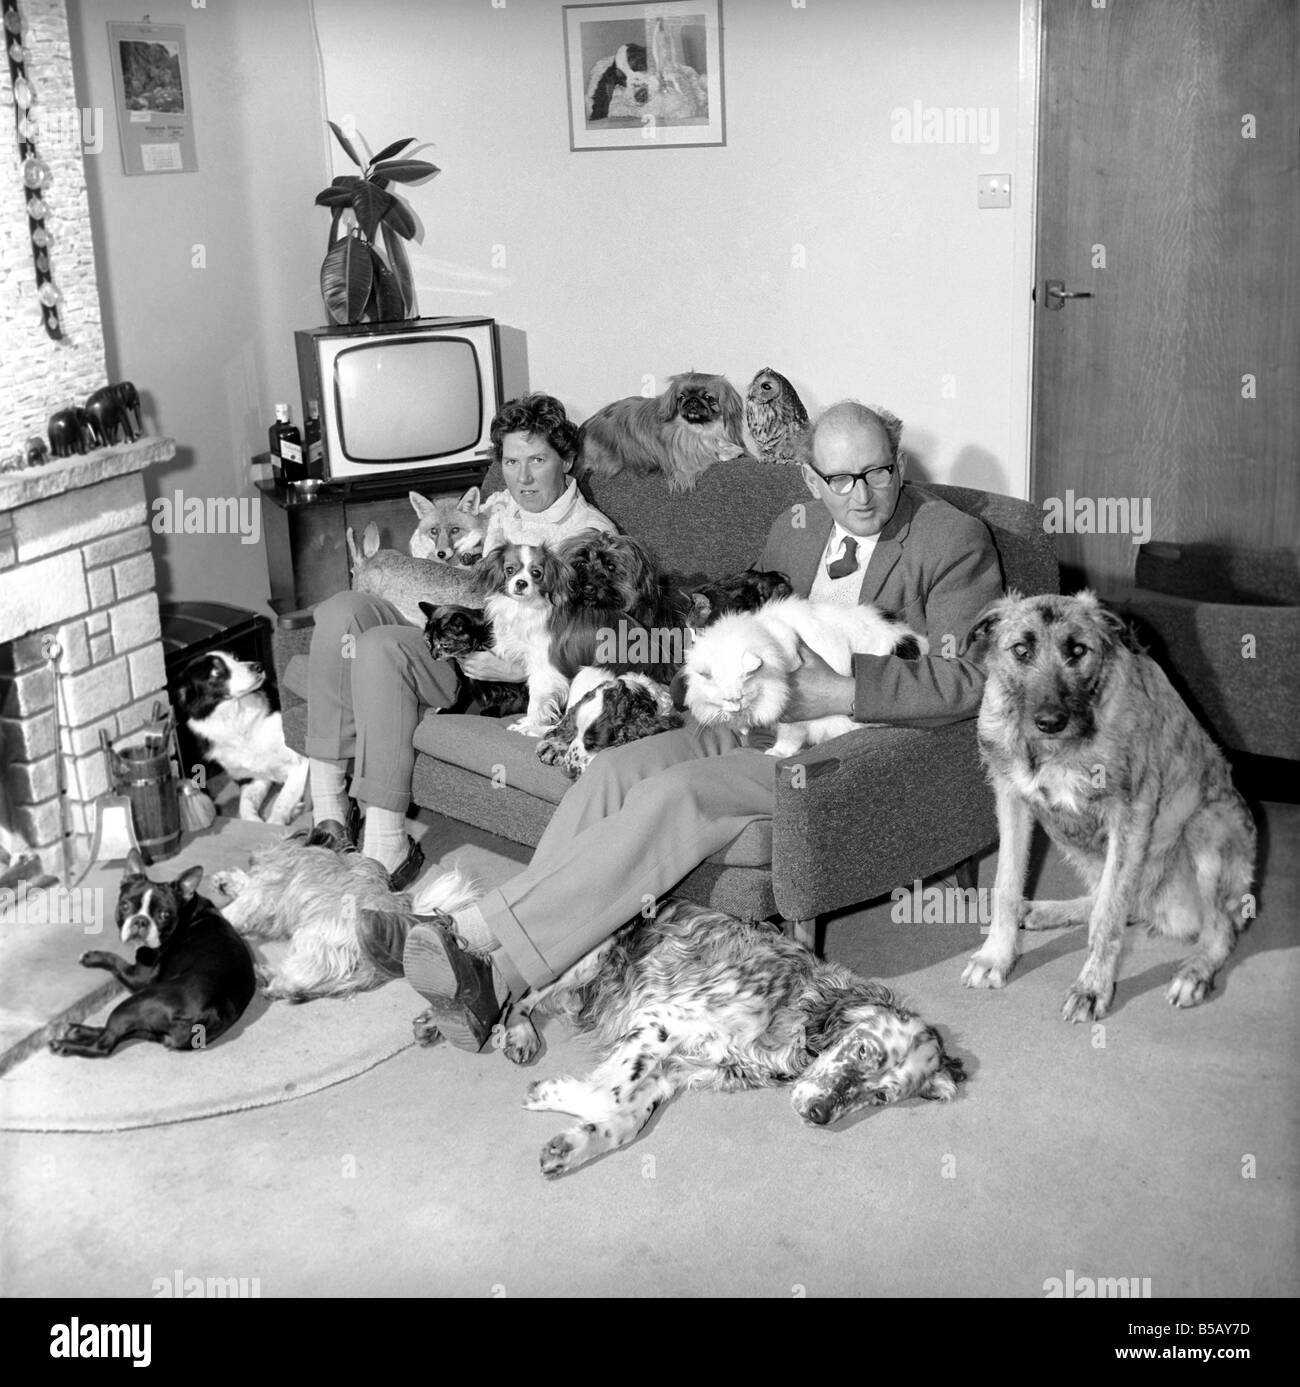 John Holmes seen here with his wife and surrounded by all his pets, which includes dogs, cats, a fox and a tawny owl. Jan. 1965 Stock Photo